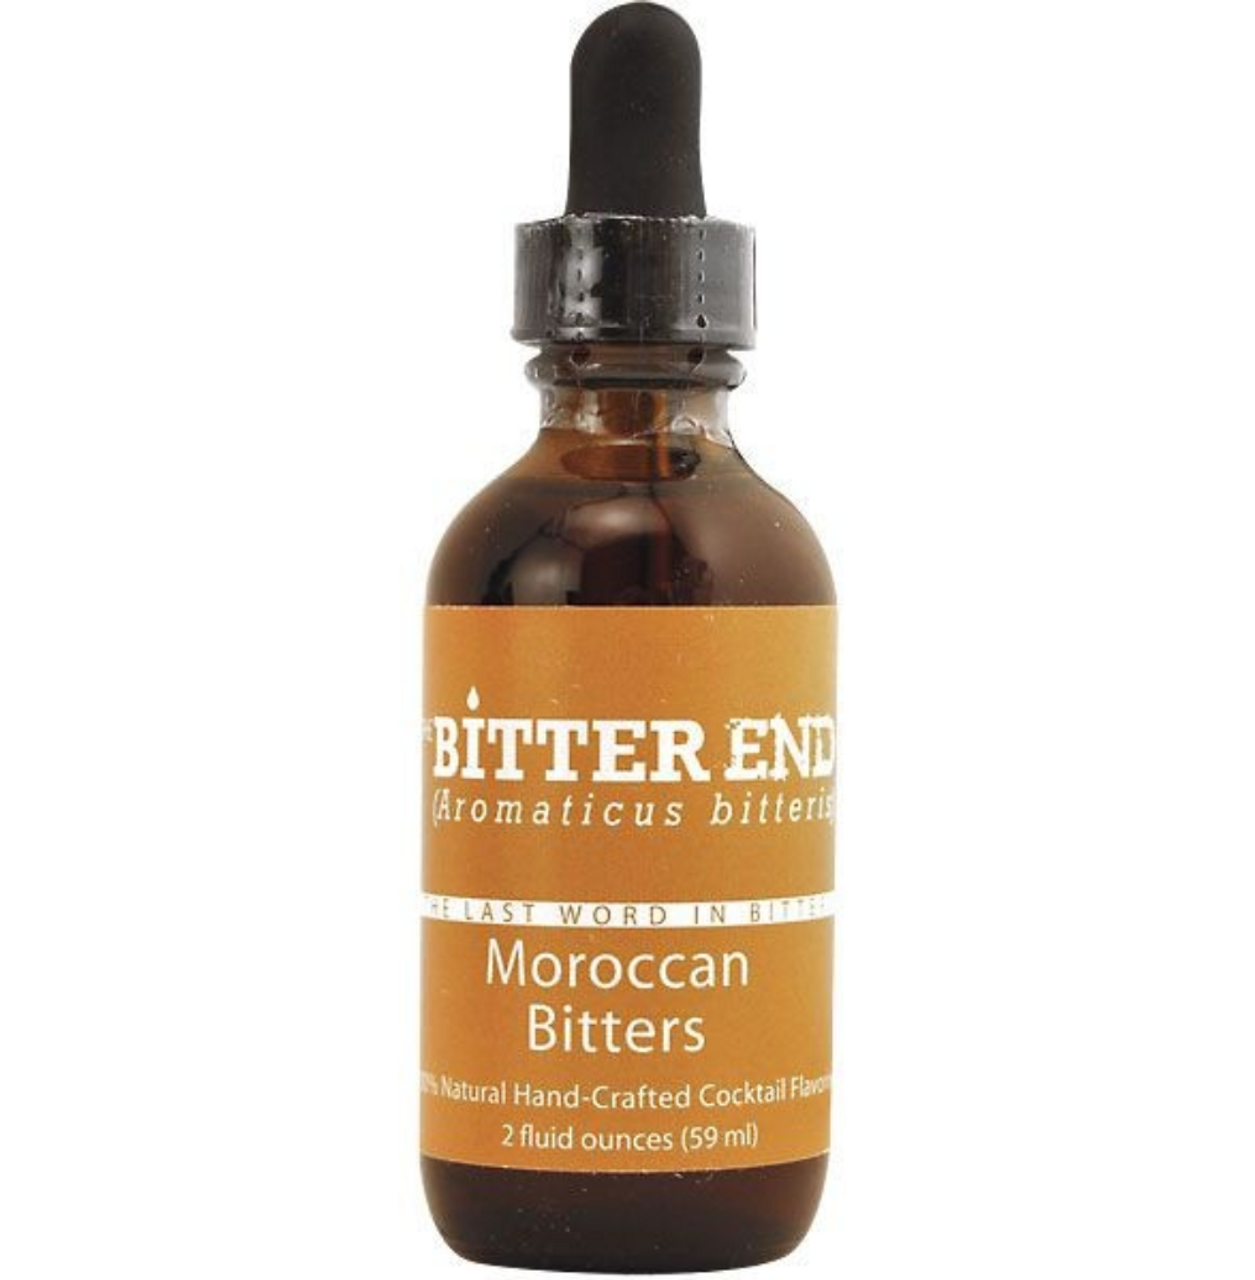 The Bitter End, Moroccan Bitters